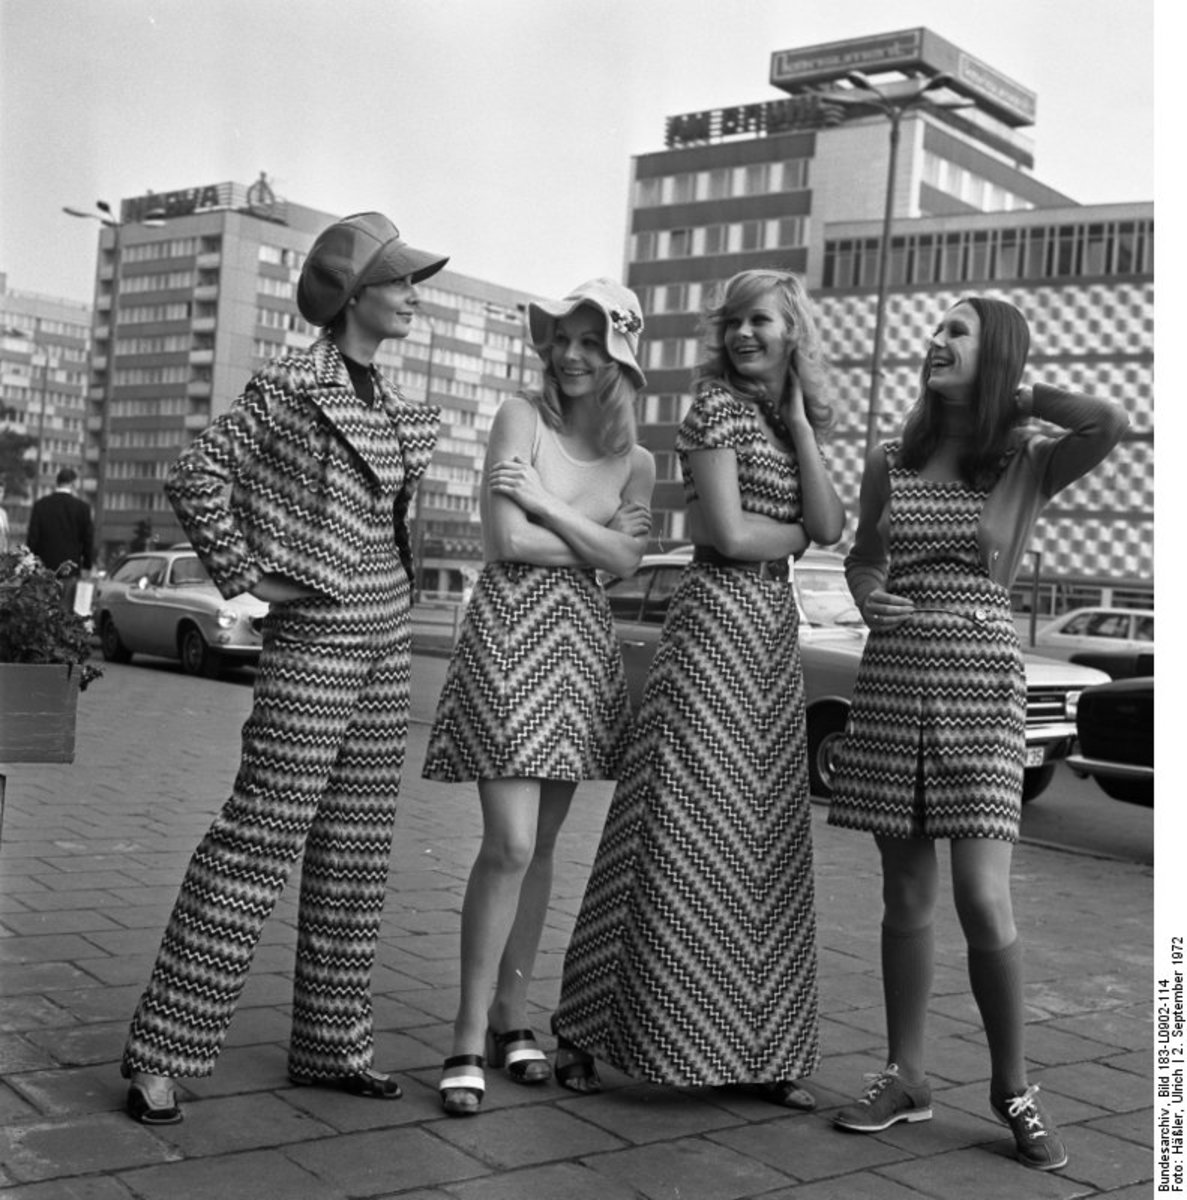 clothing history fashion and style in the 1970s